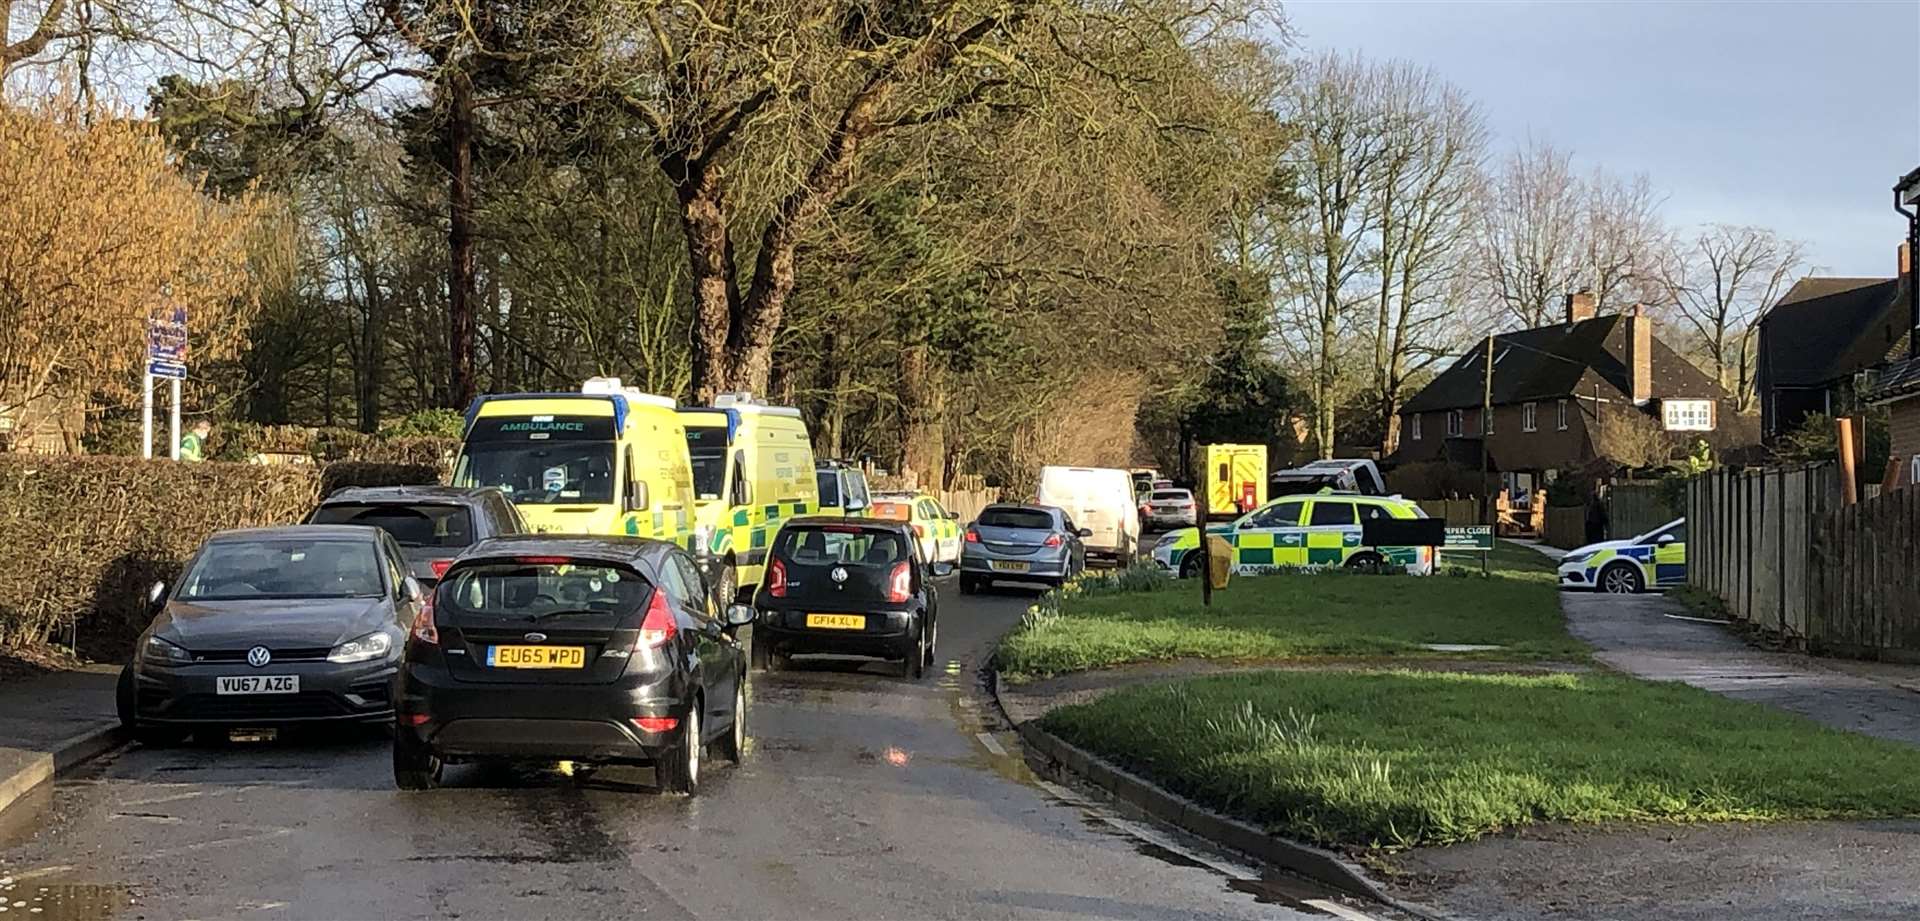 The accident happened in Eyhorne Street. Picture: Adam Ward